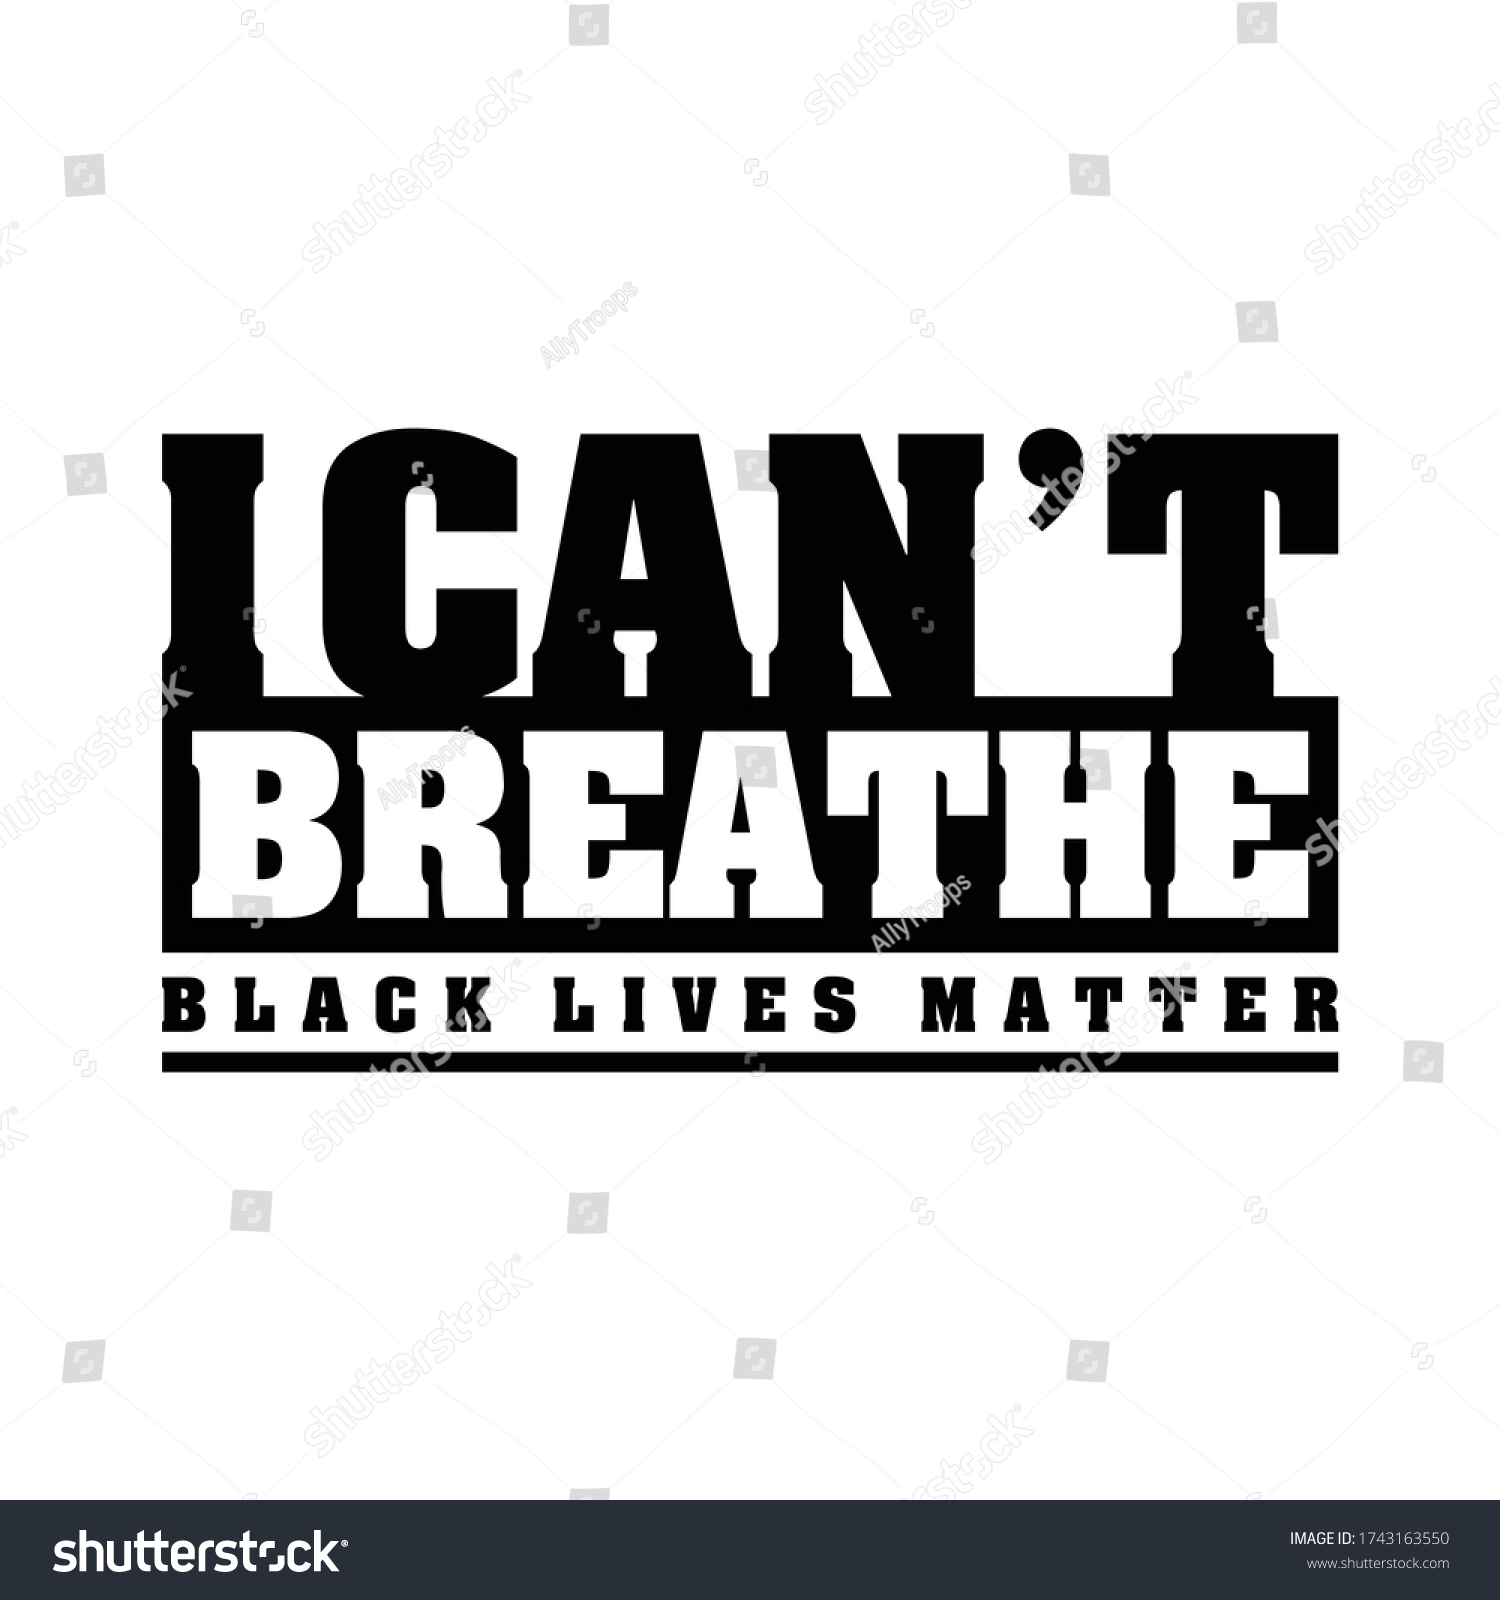 I Can't Breathe, Black Lives Matter. Protest Banner about Human Right of Black People in US. America. Vector Illustration.  #1743163550